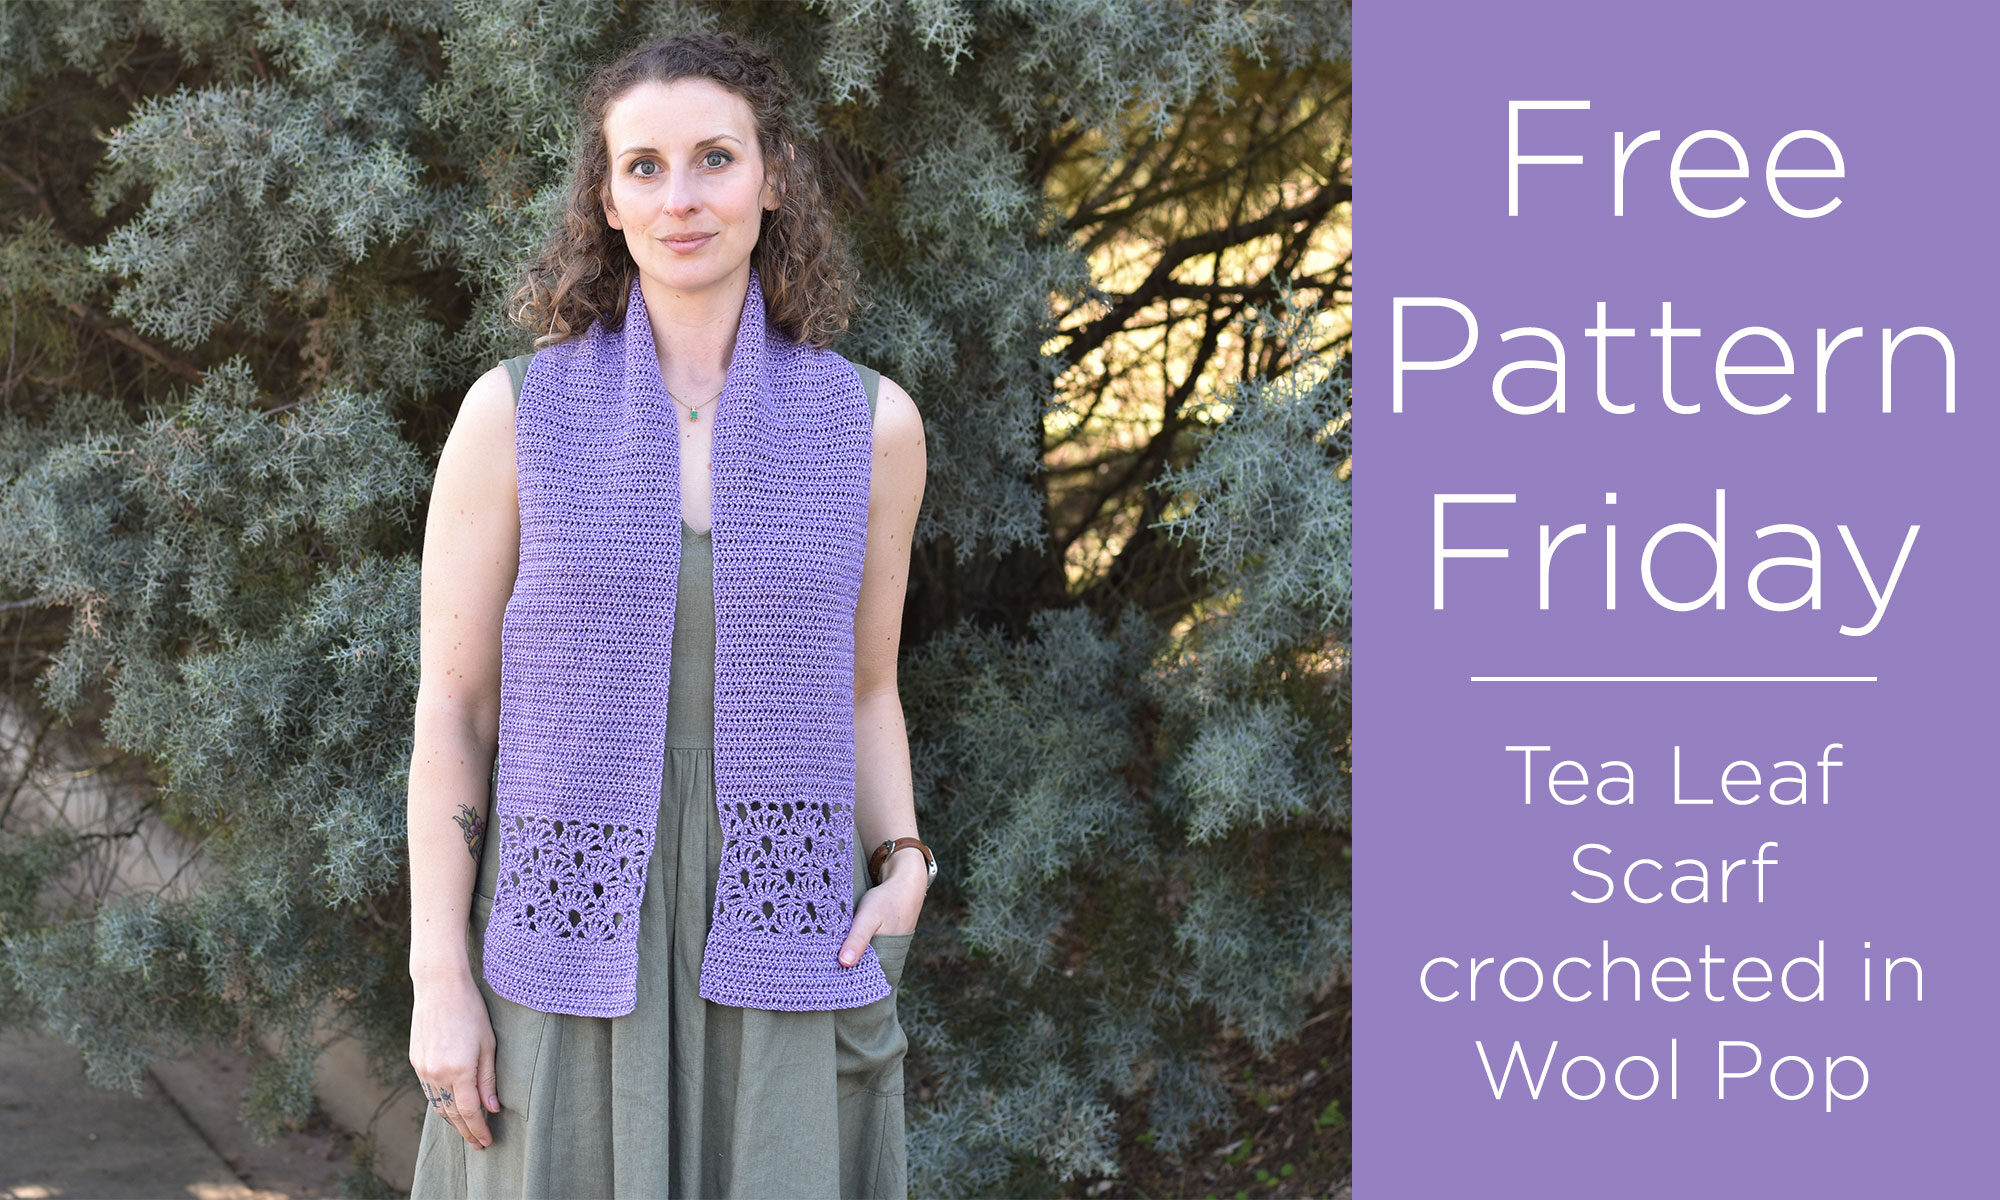 Photo of a person wearing the Tea Leaf Scarf with trees in the background, and "Free Pattern Friday - Tea Leaf Scarf crocheted in Wool Pop" written on the right side in white text on a purple background